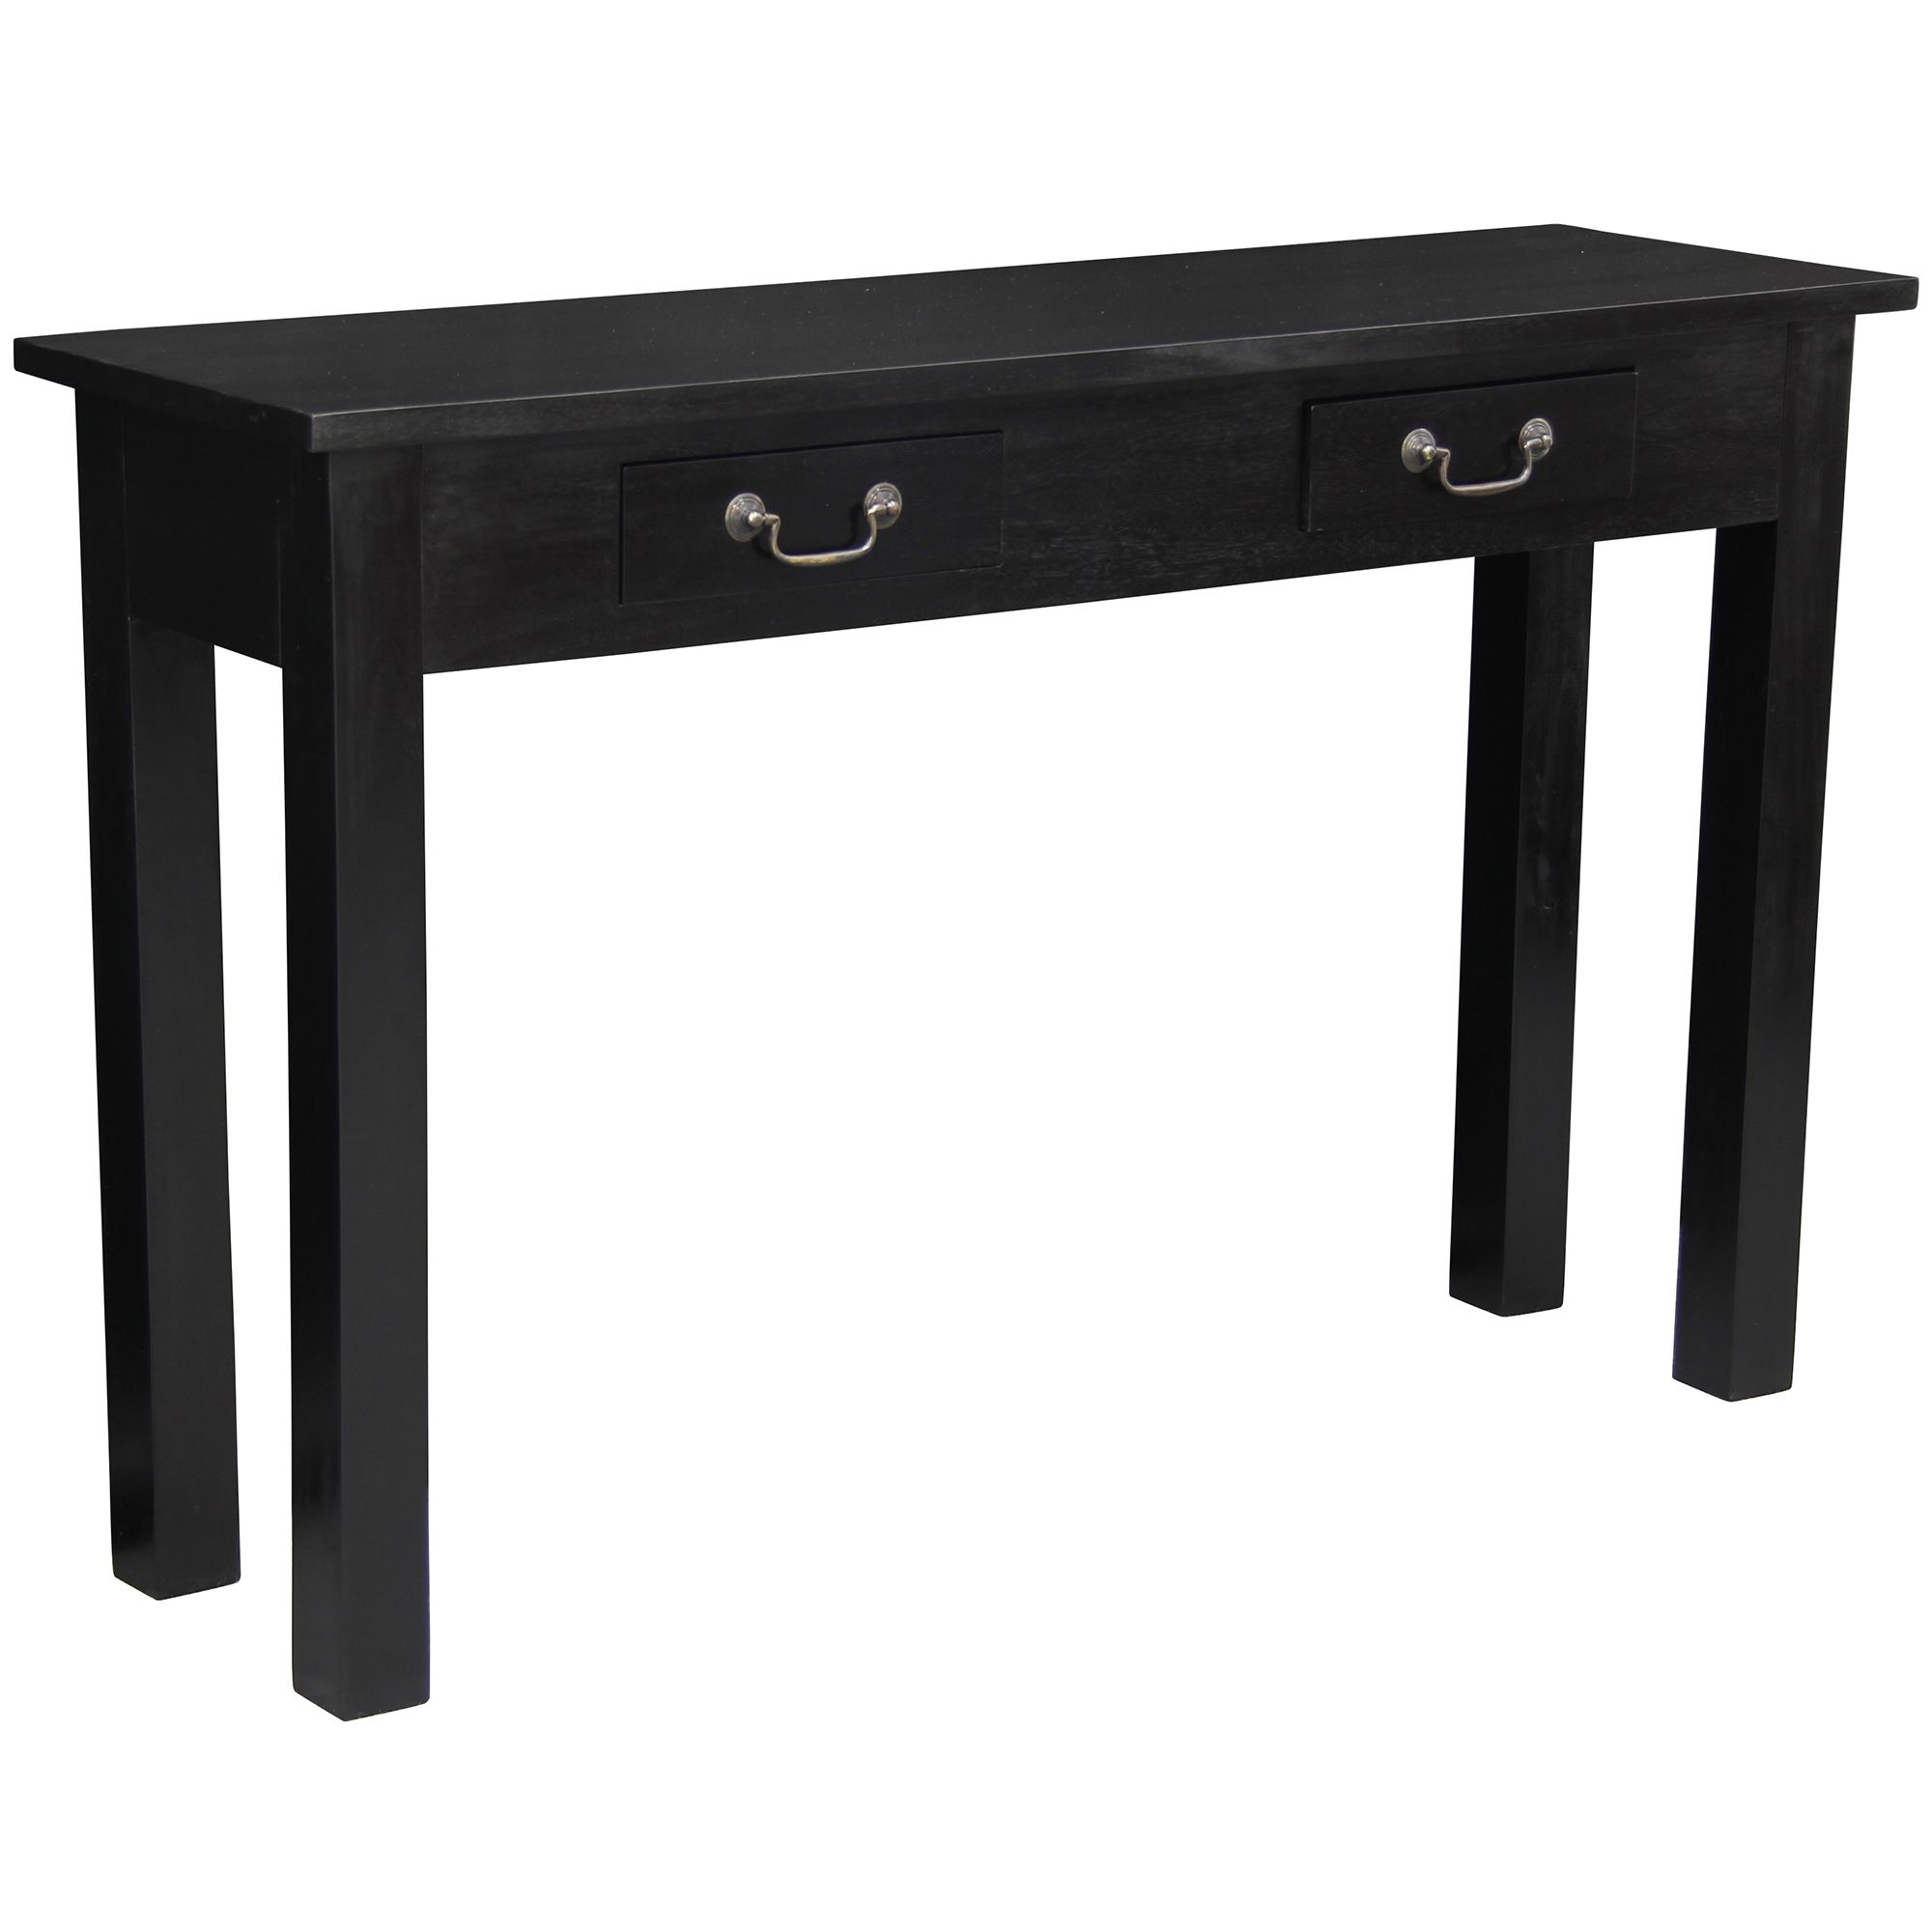 New Black Larsson 2 Drawer Mahogany Console Table  Designs,console With Regard To 2 Drawer Oval Console Tables (View 13 of 20)